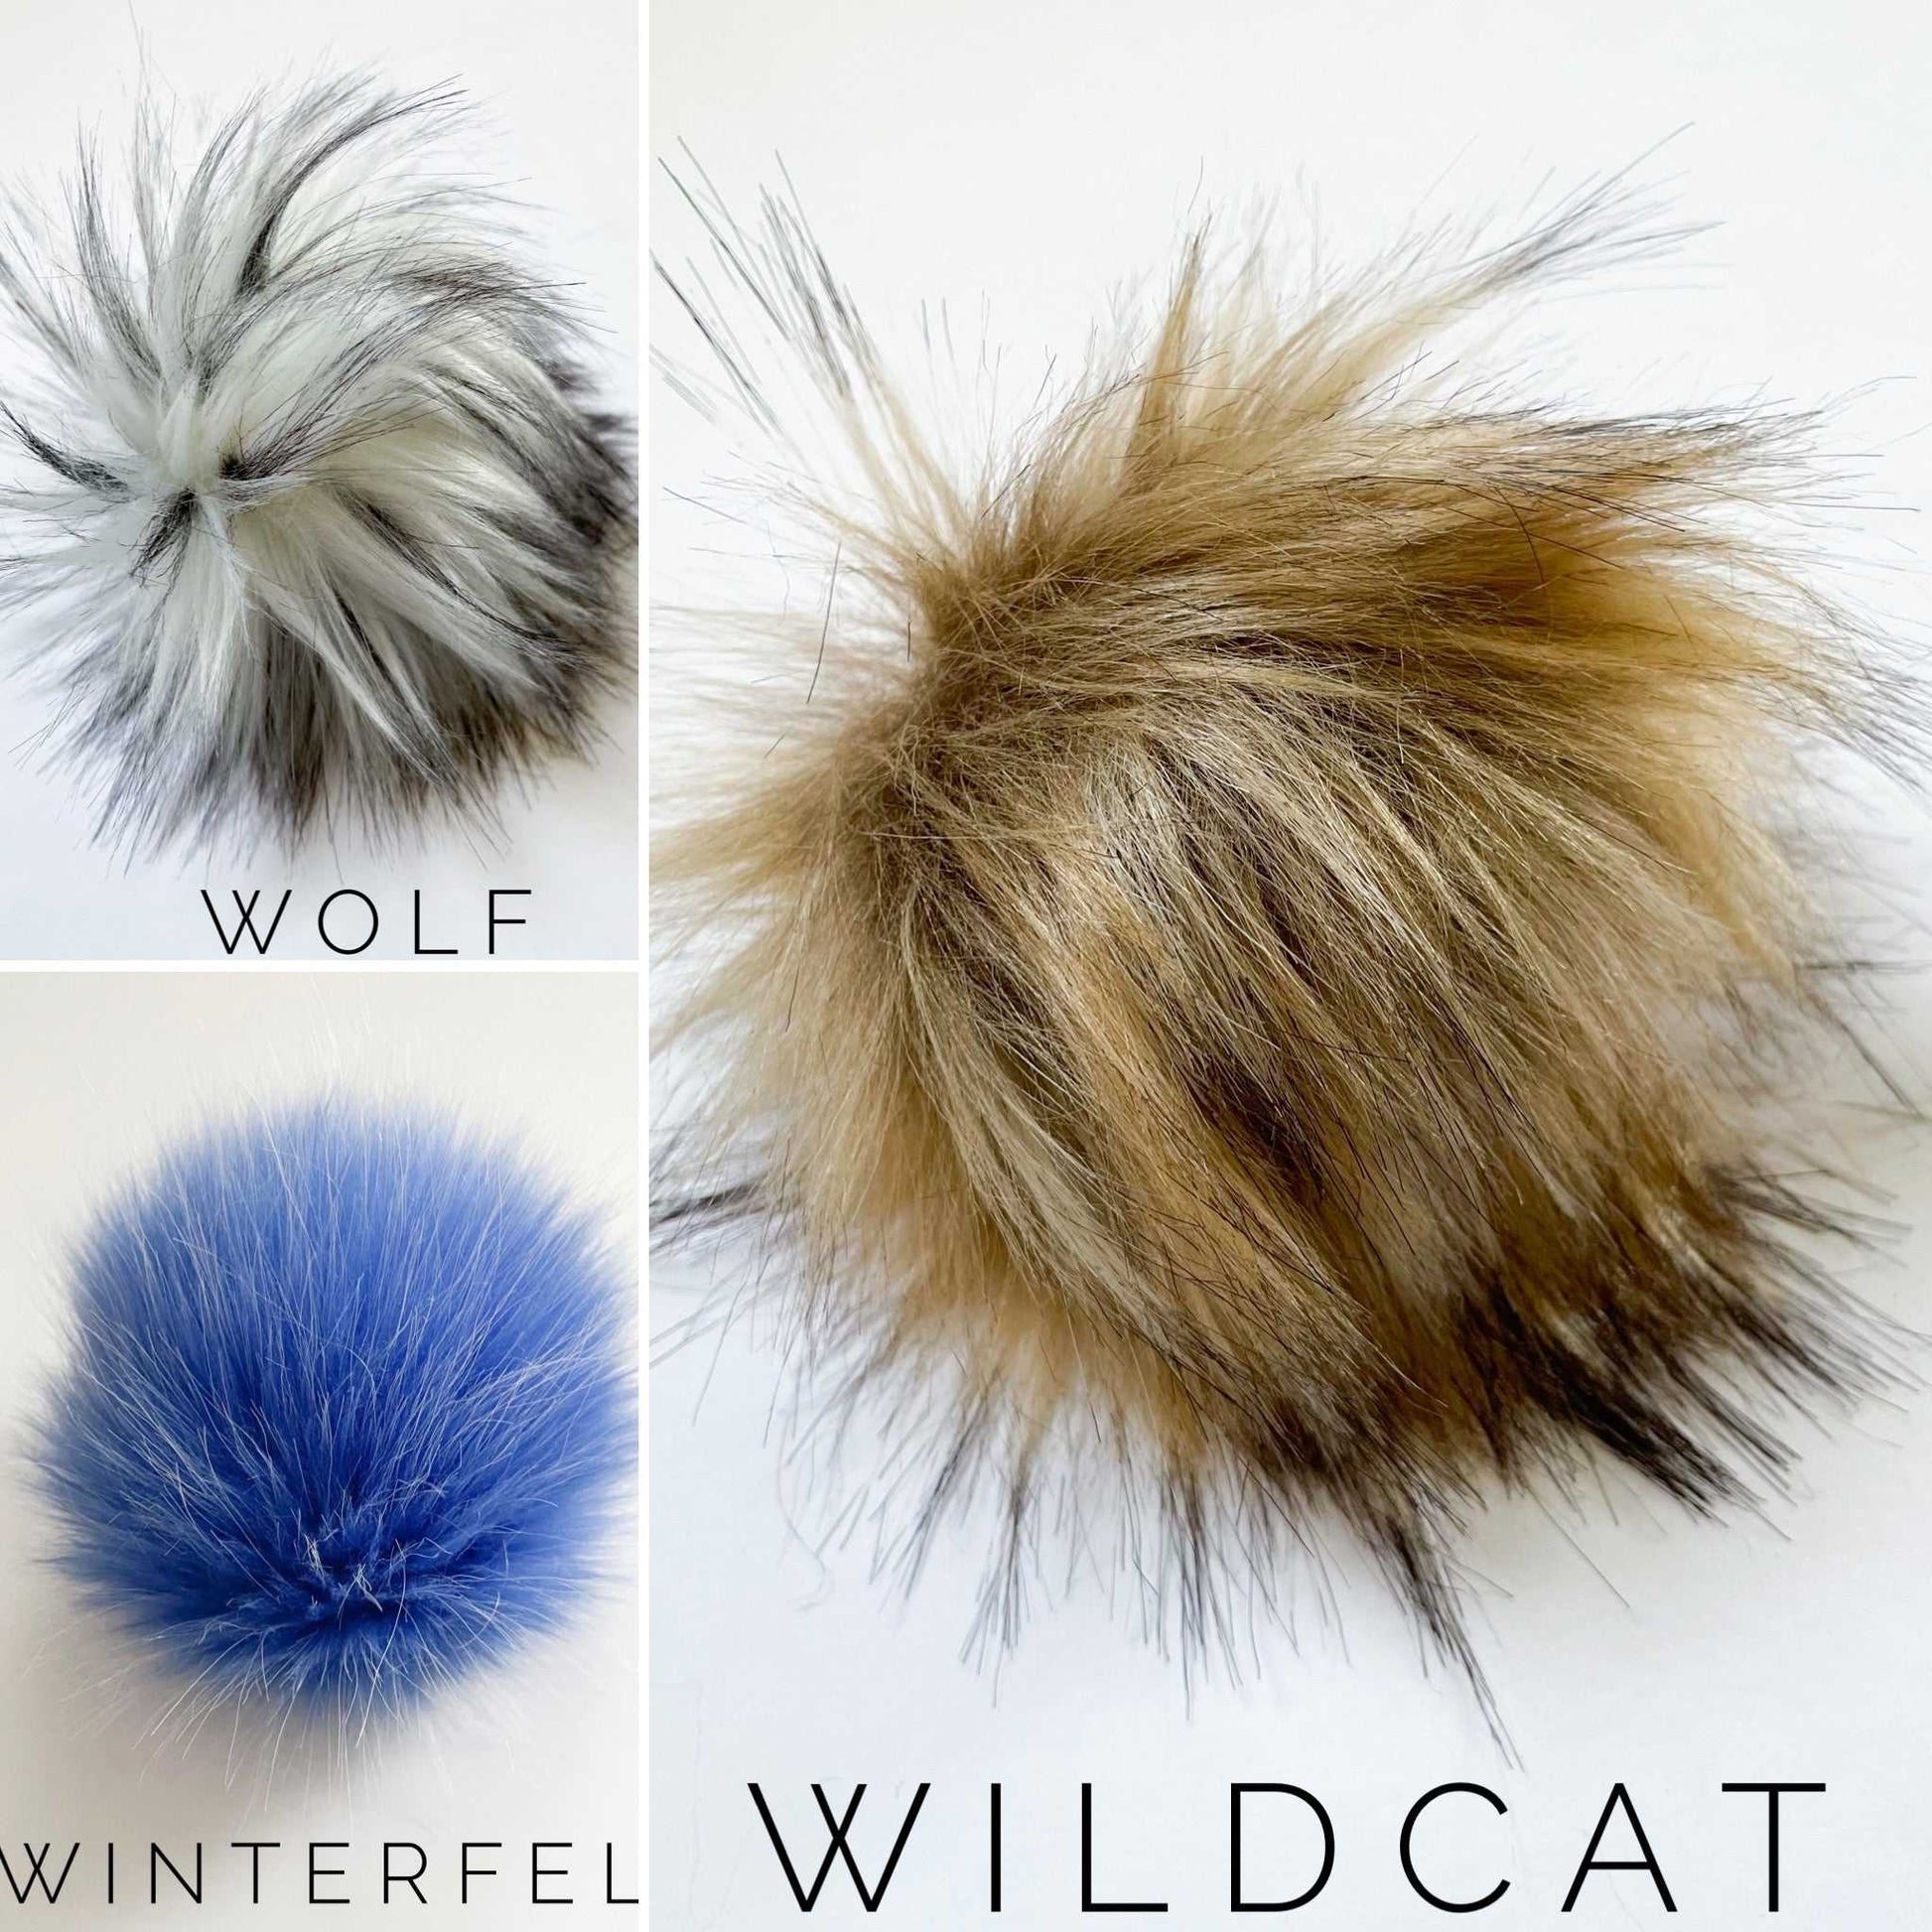 Caramel Wolf Luxury Faux Fur Pom pom | Tan, Brown and Blonde Tie, Button or Snap Pom pom Pom Poms 7 $ Buttons & Beans Co.